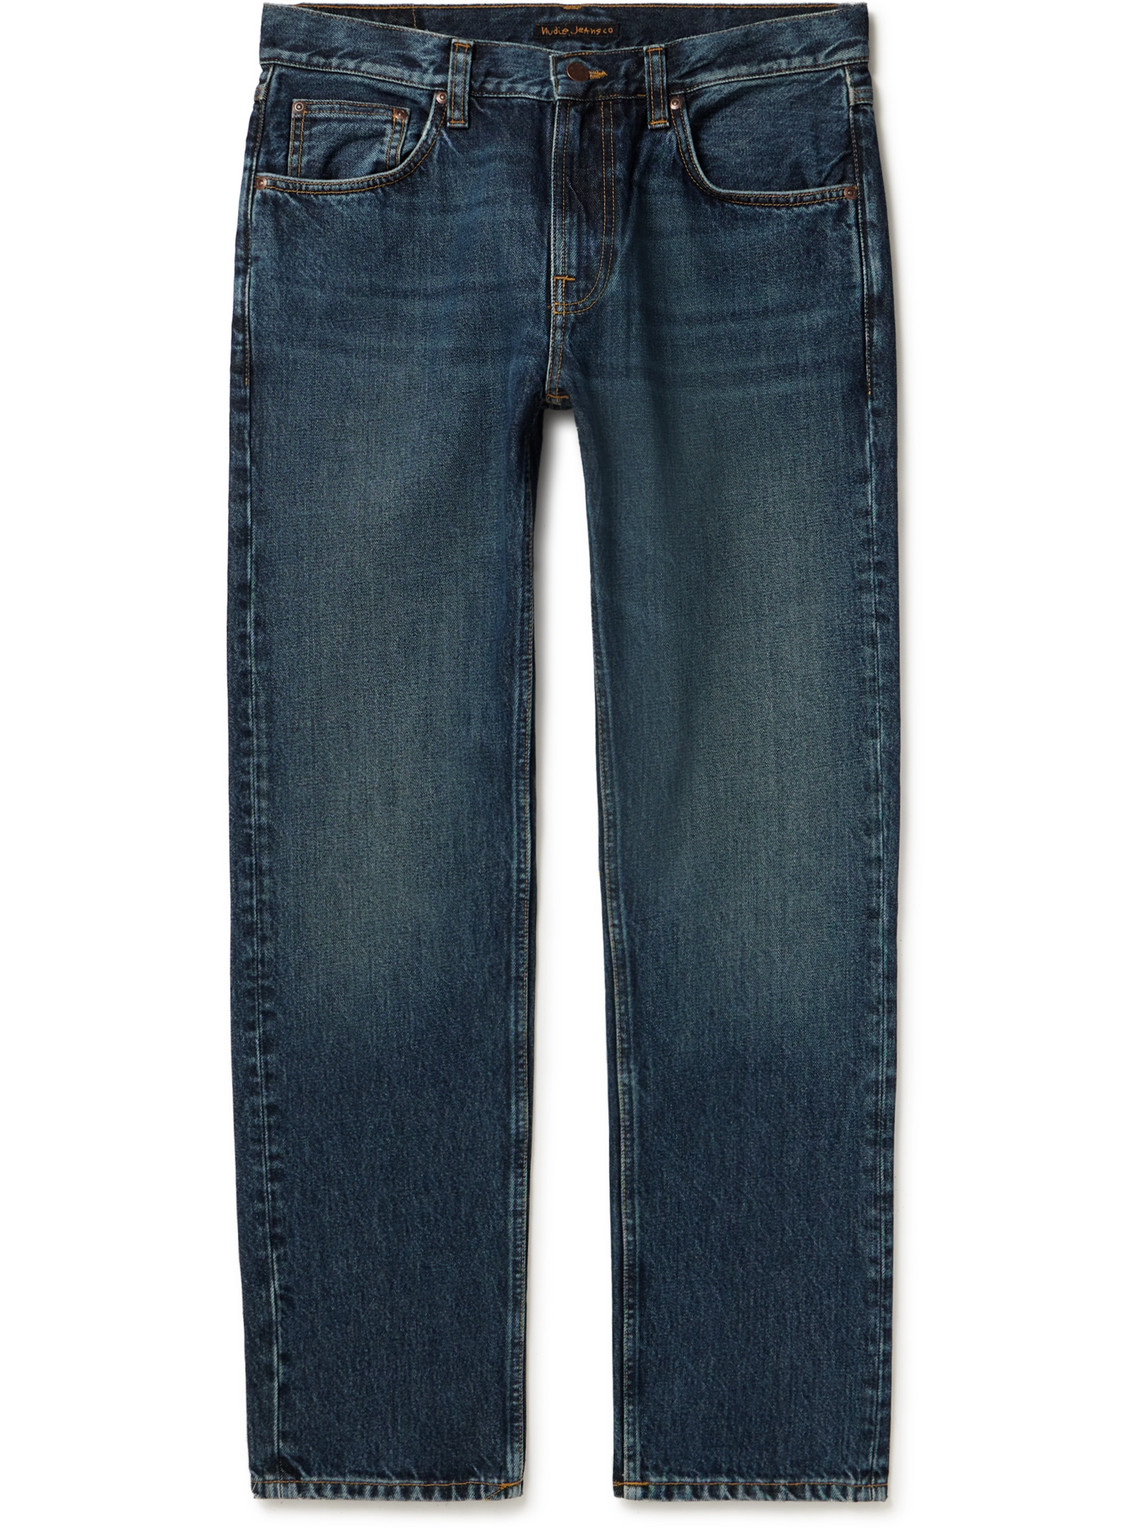 Nudie Jeans Gritty Jackson Jeans 14.9oz In Blue